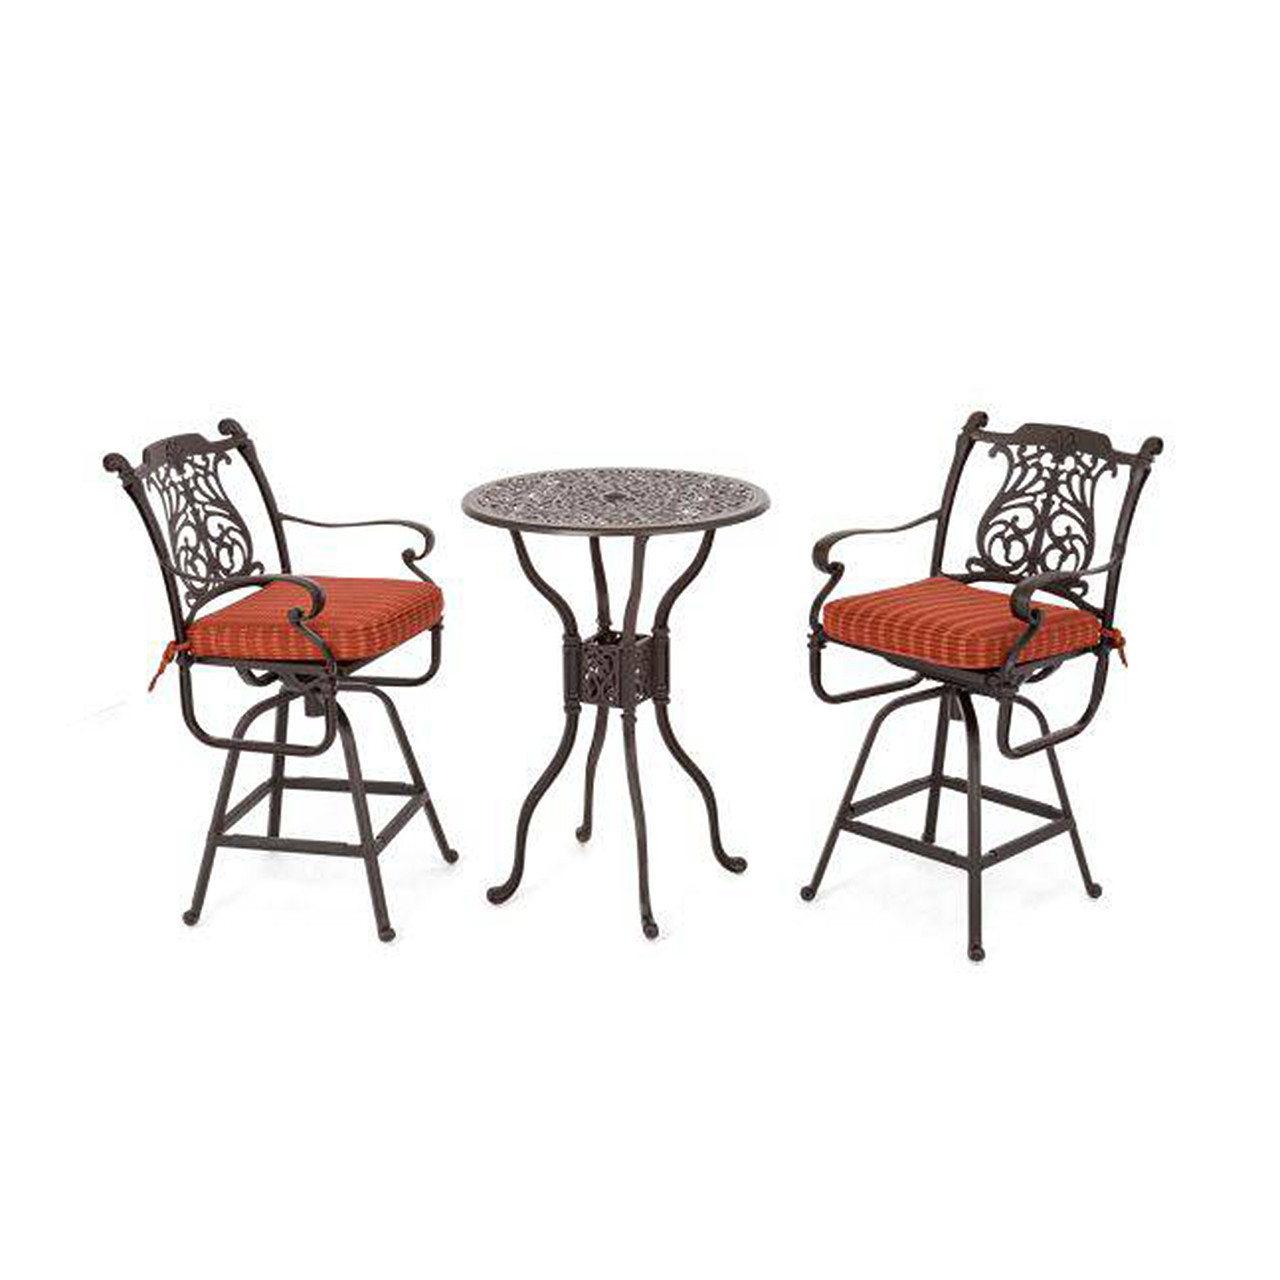 Naples Aged Bronze Cast Aluminum with Cushions 3 Piece Swivel Bar Set + 30 in. D Table